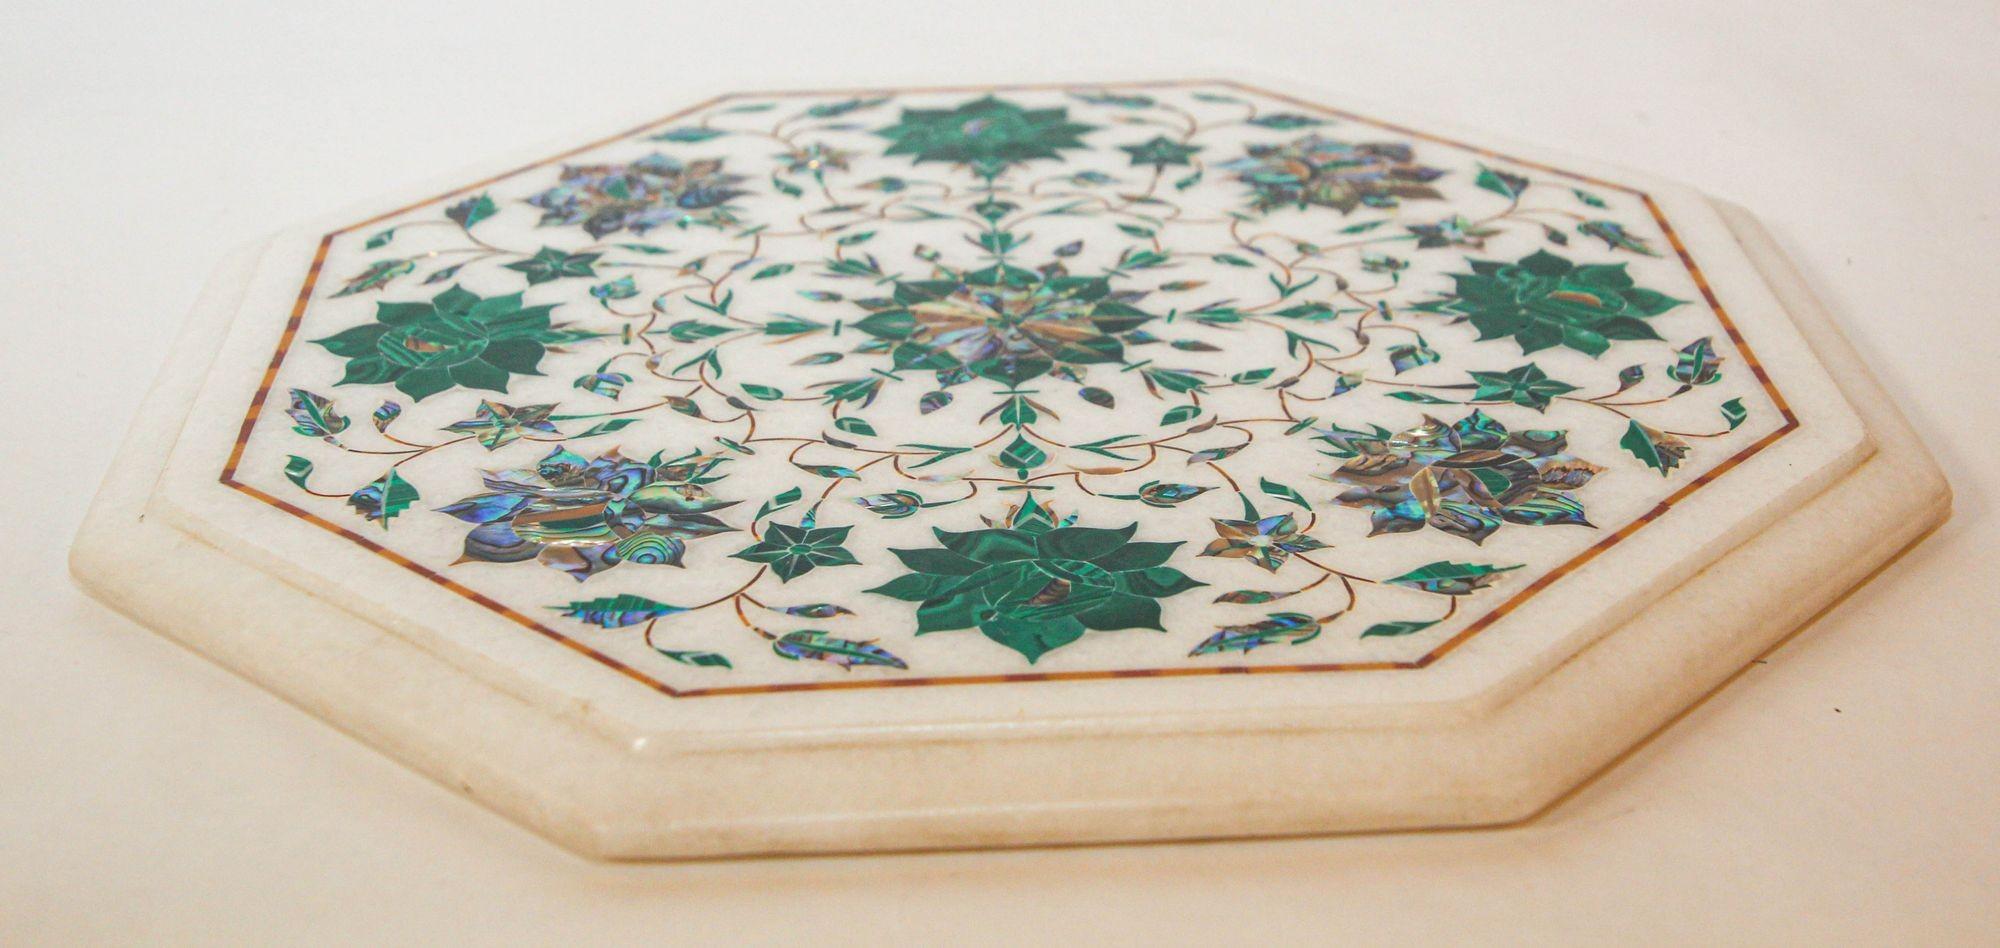 Pietra Dura White Mosaic Octagonal Inlaid Marble Top Handcrafted Agra India 1980 en vente 3